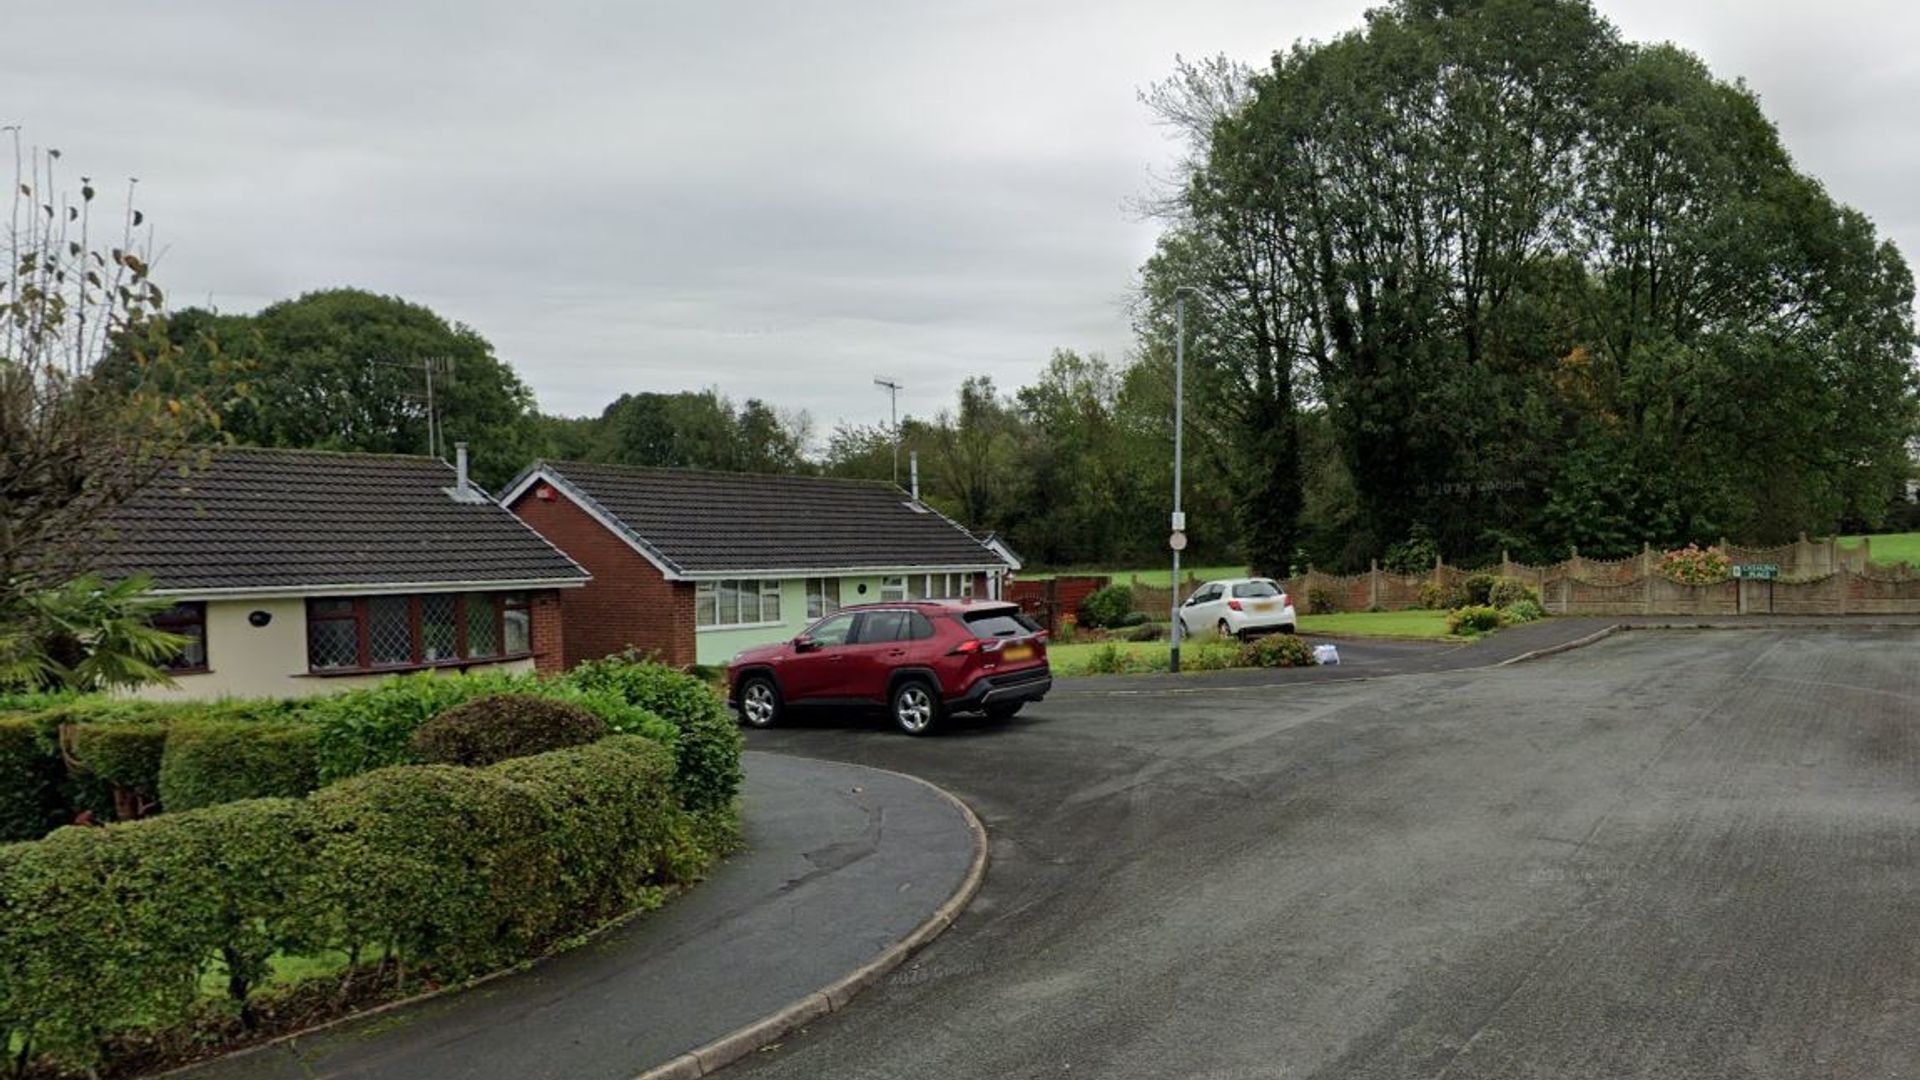 Police investigating after man and woman in 70s found dead